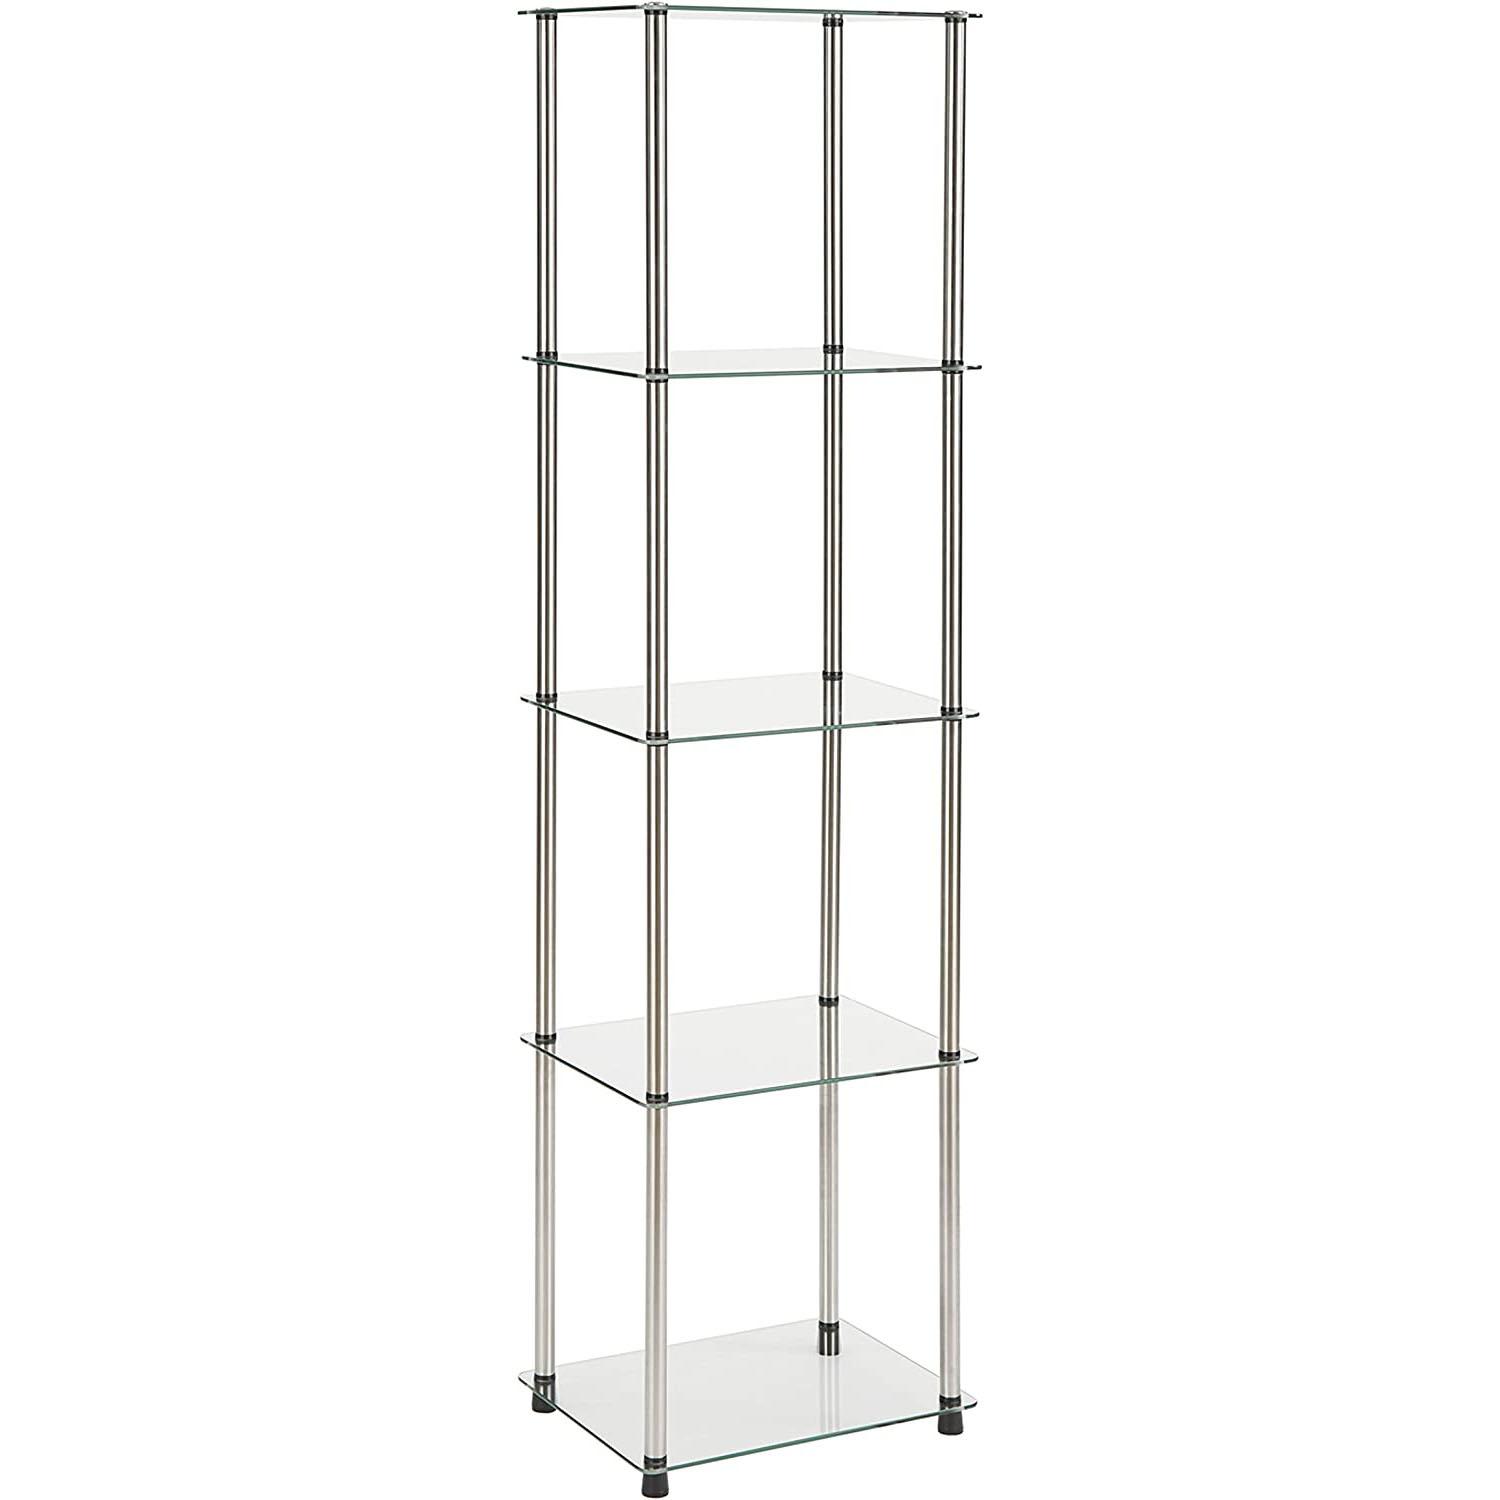 Convenience Concepts Designs2Go Classic Glass 5 Tier Tower for $36.16 Shipped